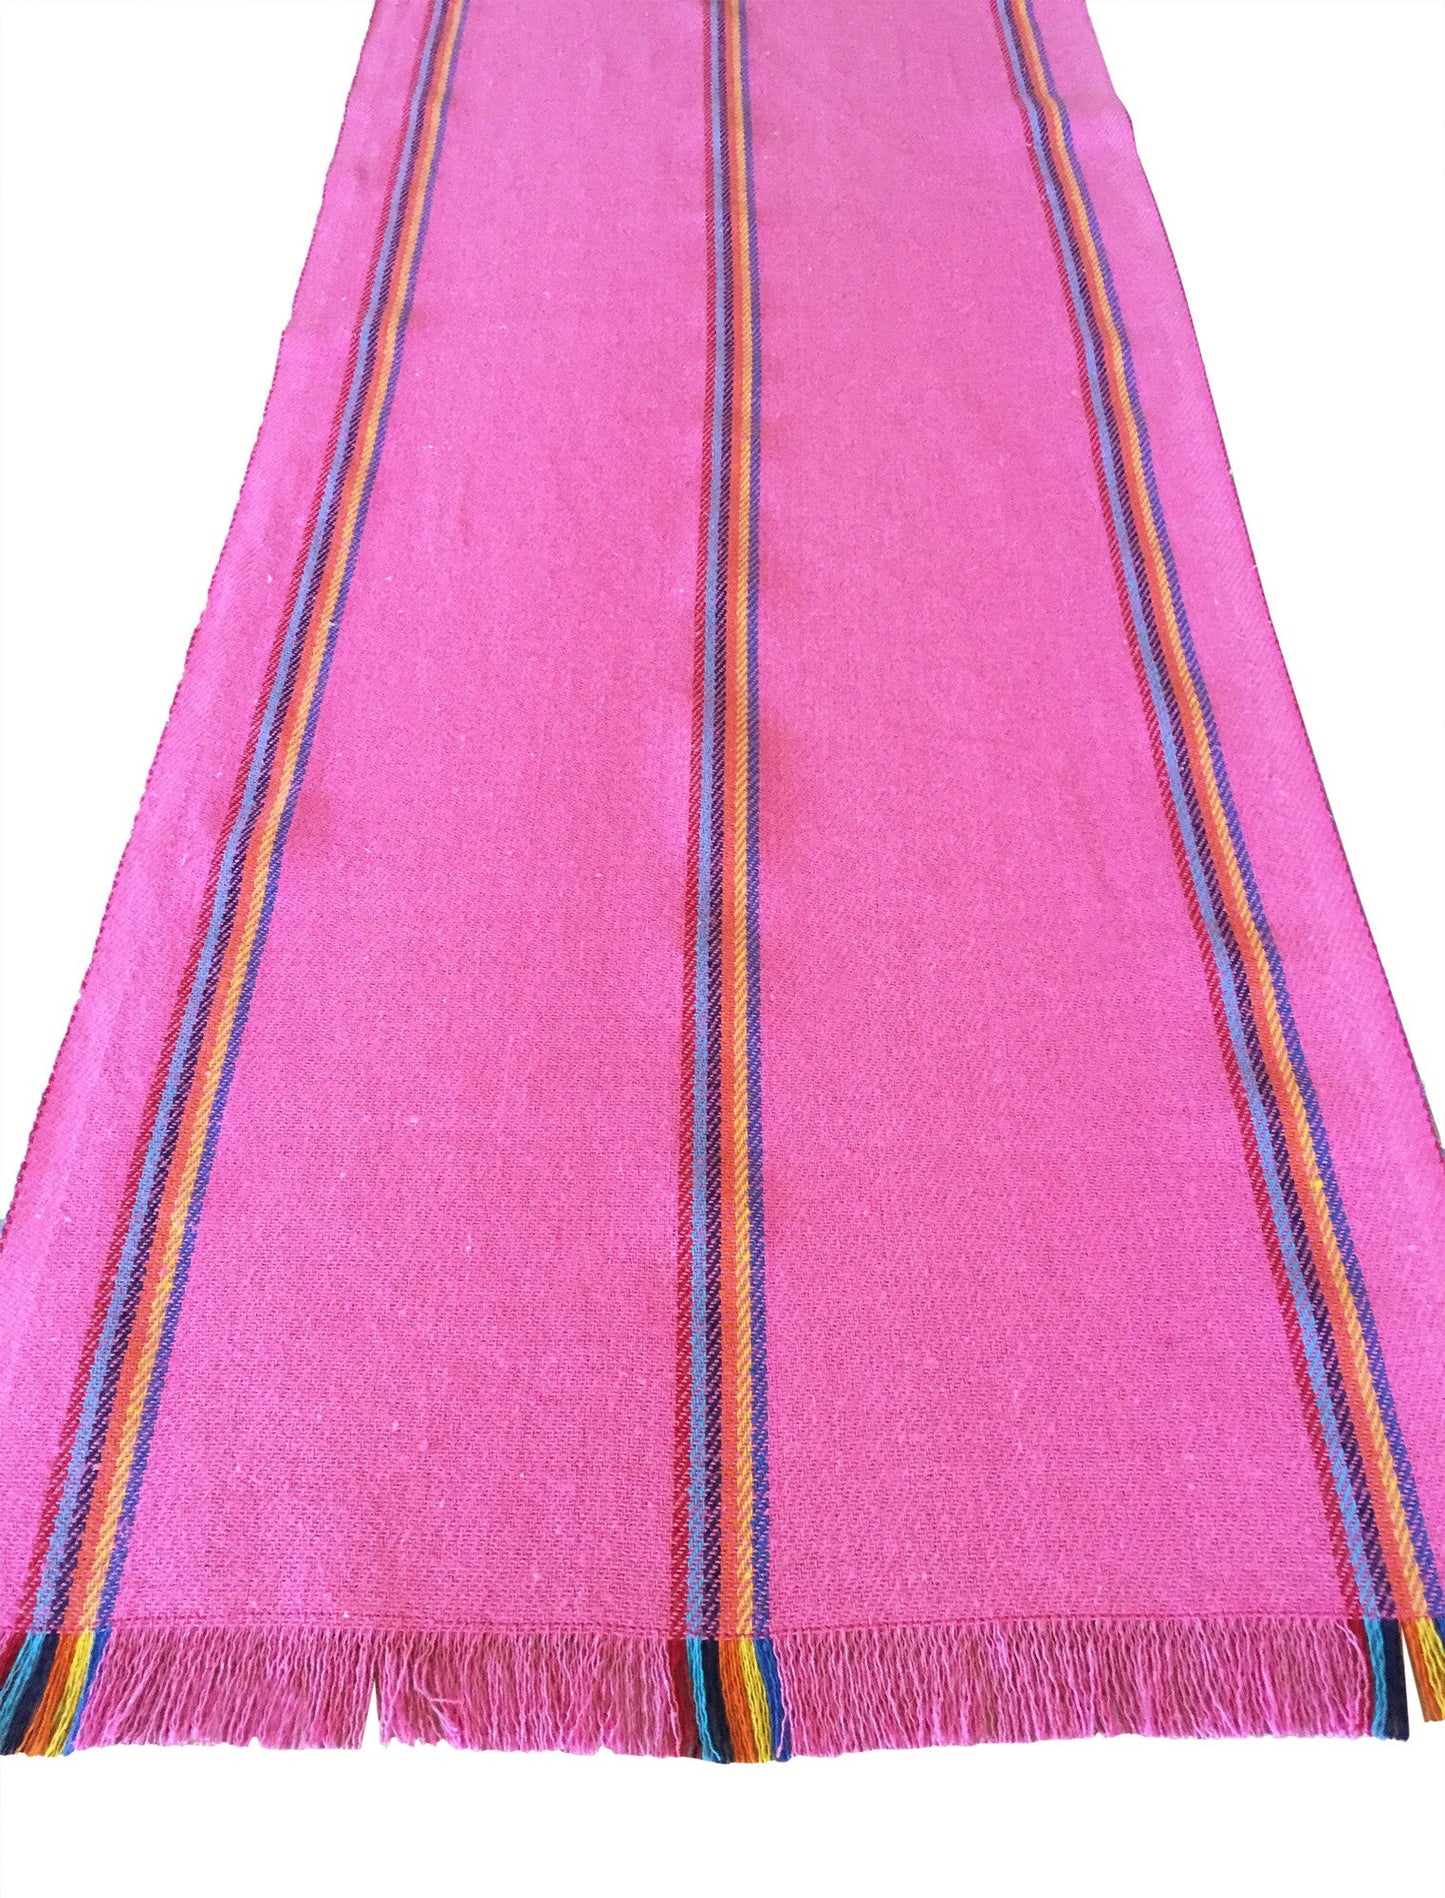 Mexican pink jerga table runner - MesaChic - 1